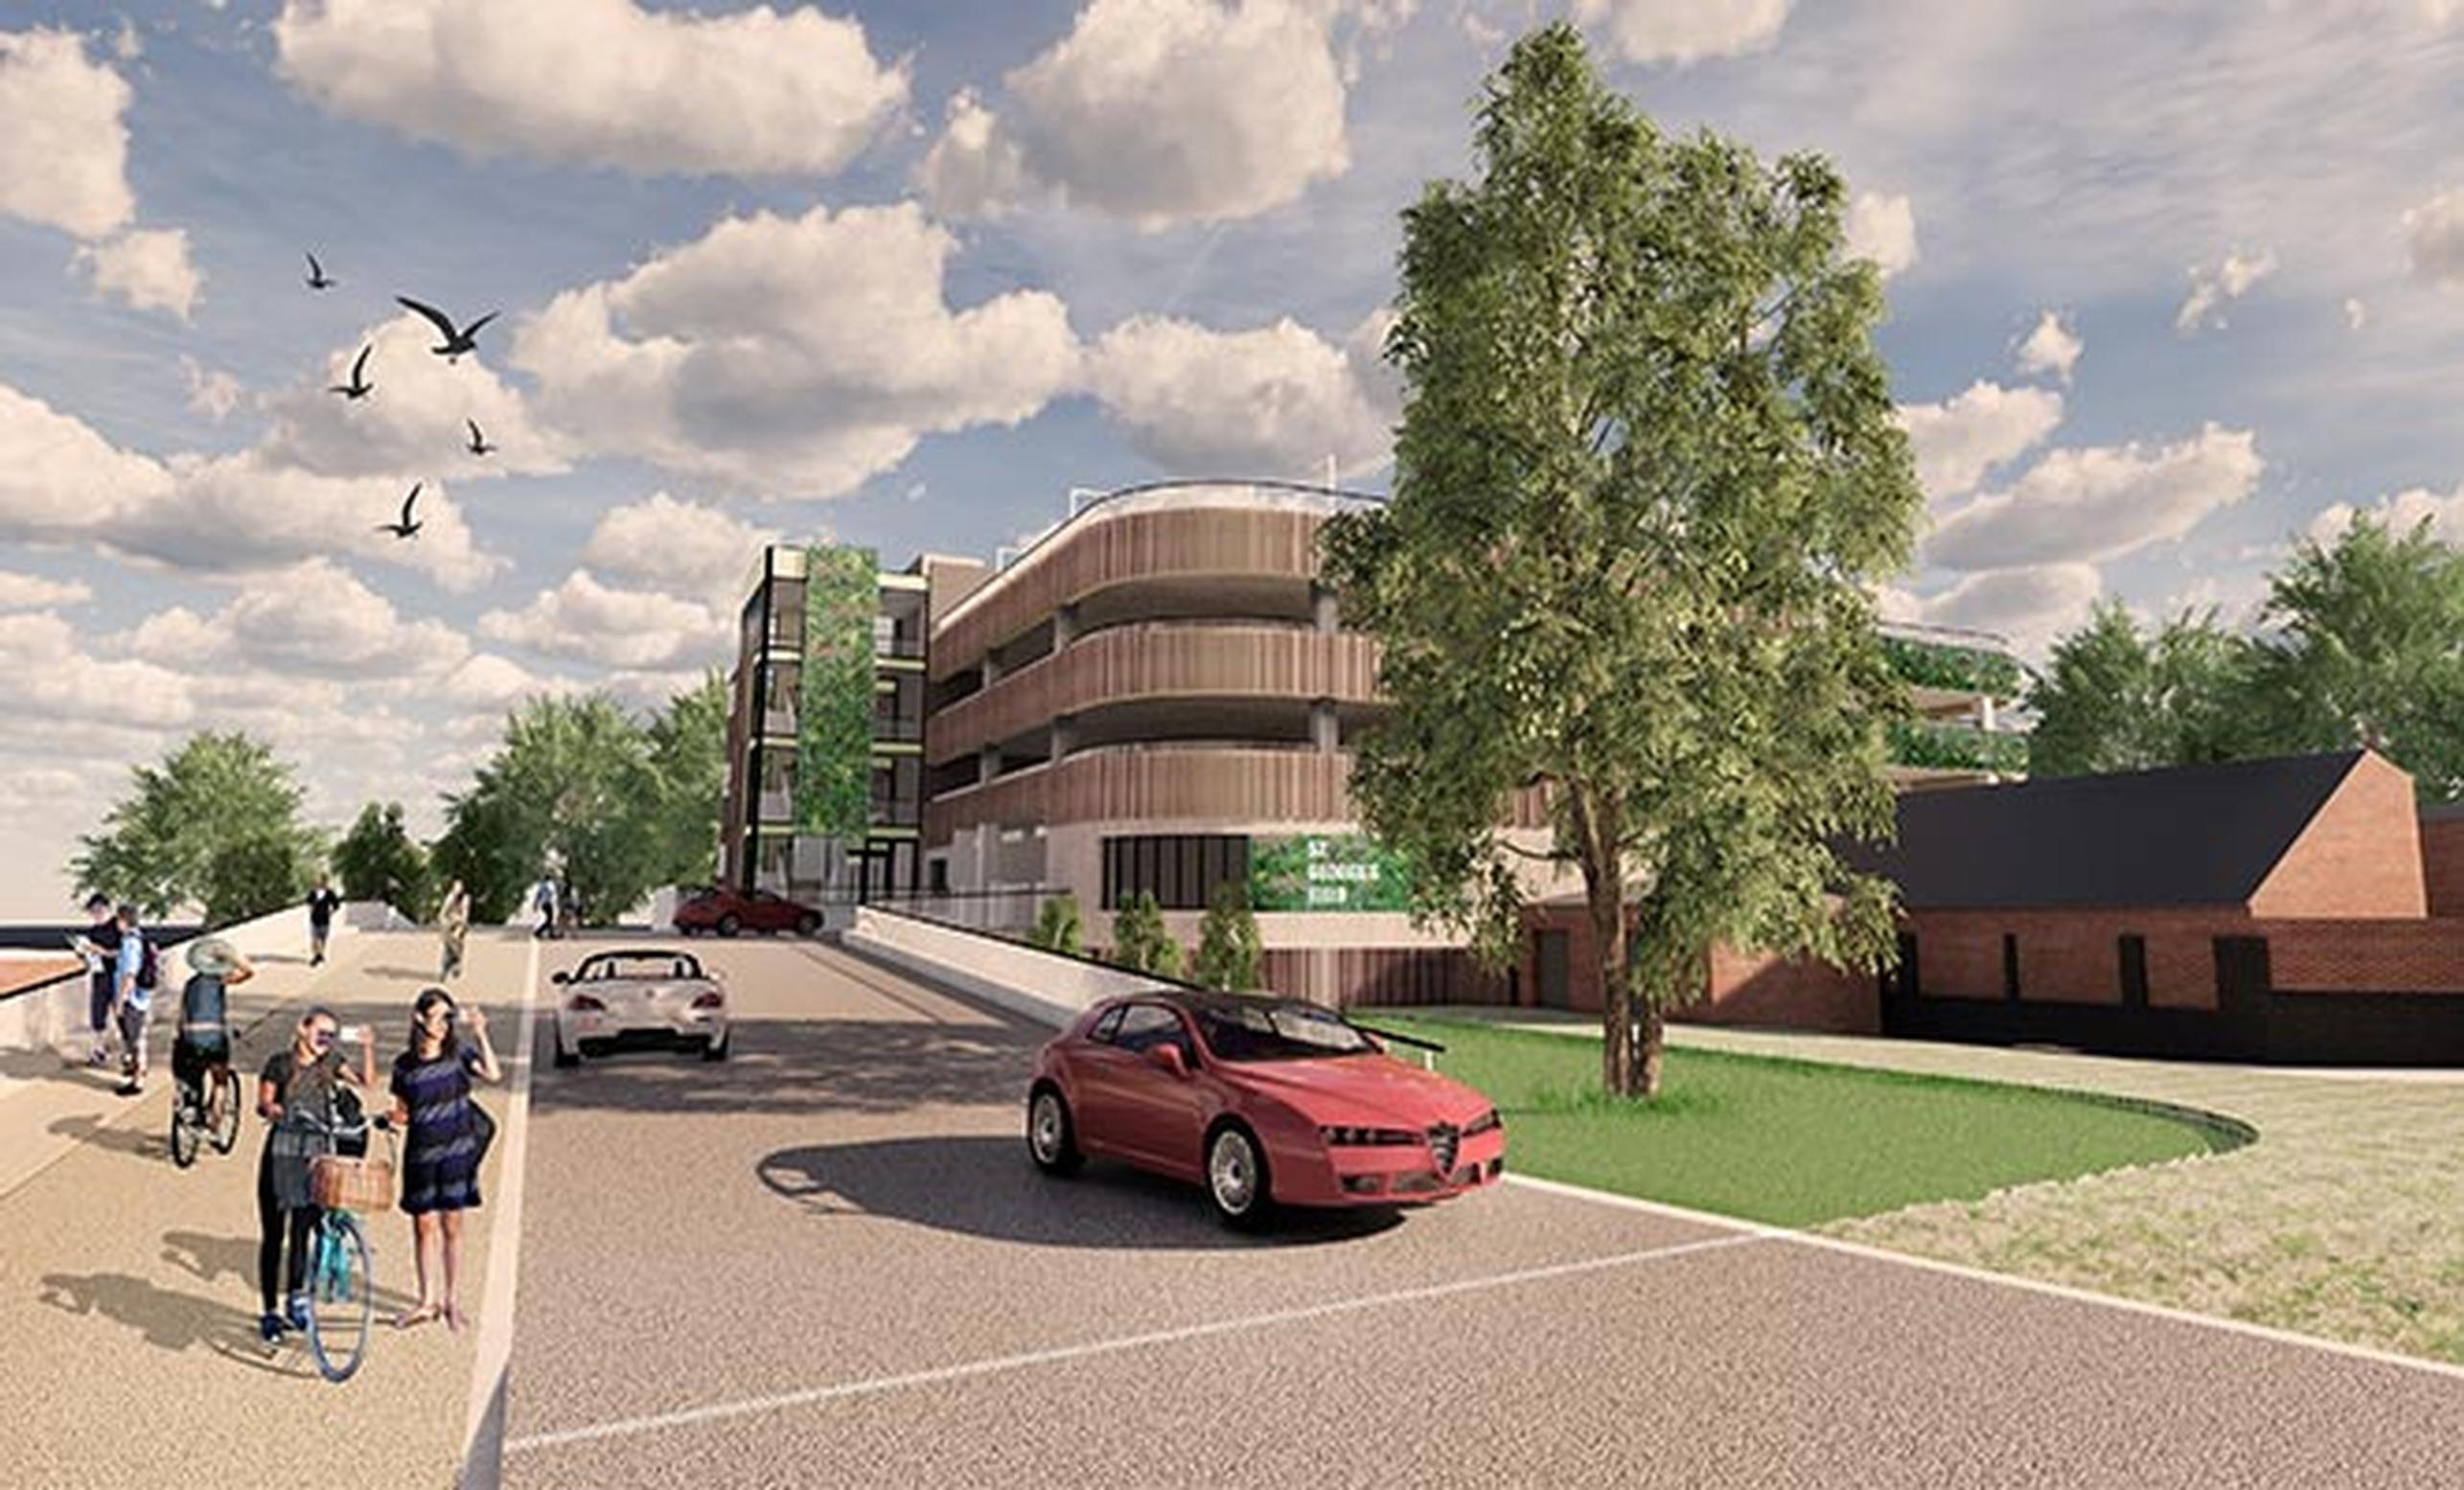 A proposed multi-storey car park in York will not go ahead